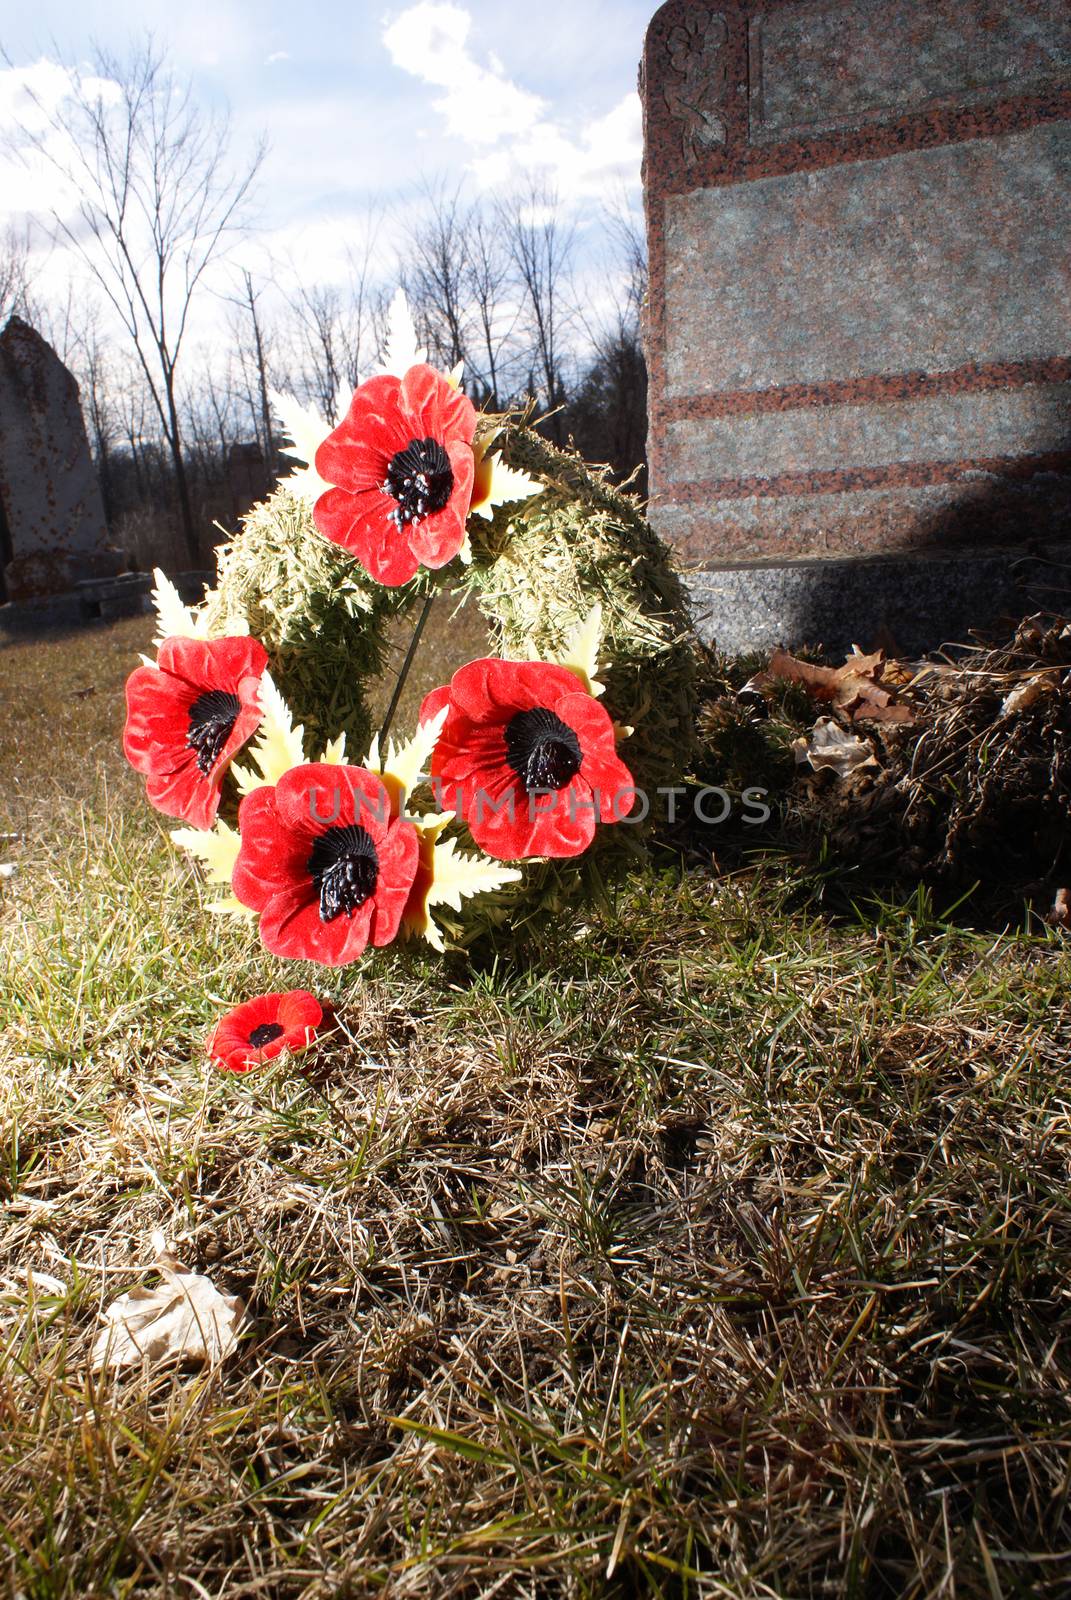 A close view of a poppy wreath at a tombstone for the honorable remembrance of those fallen loved ones.